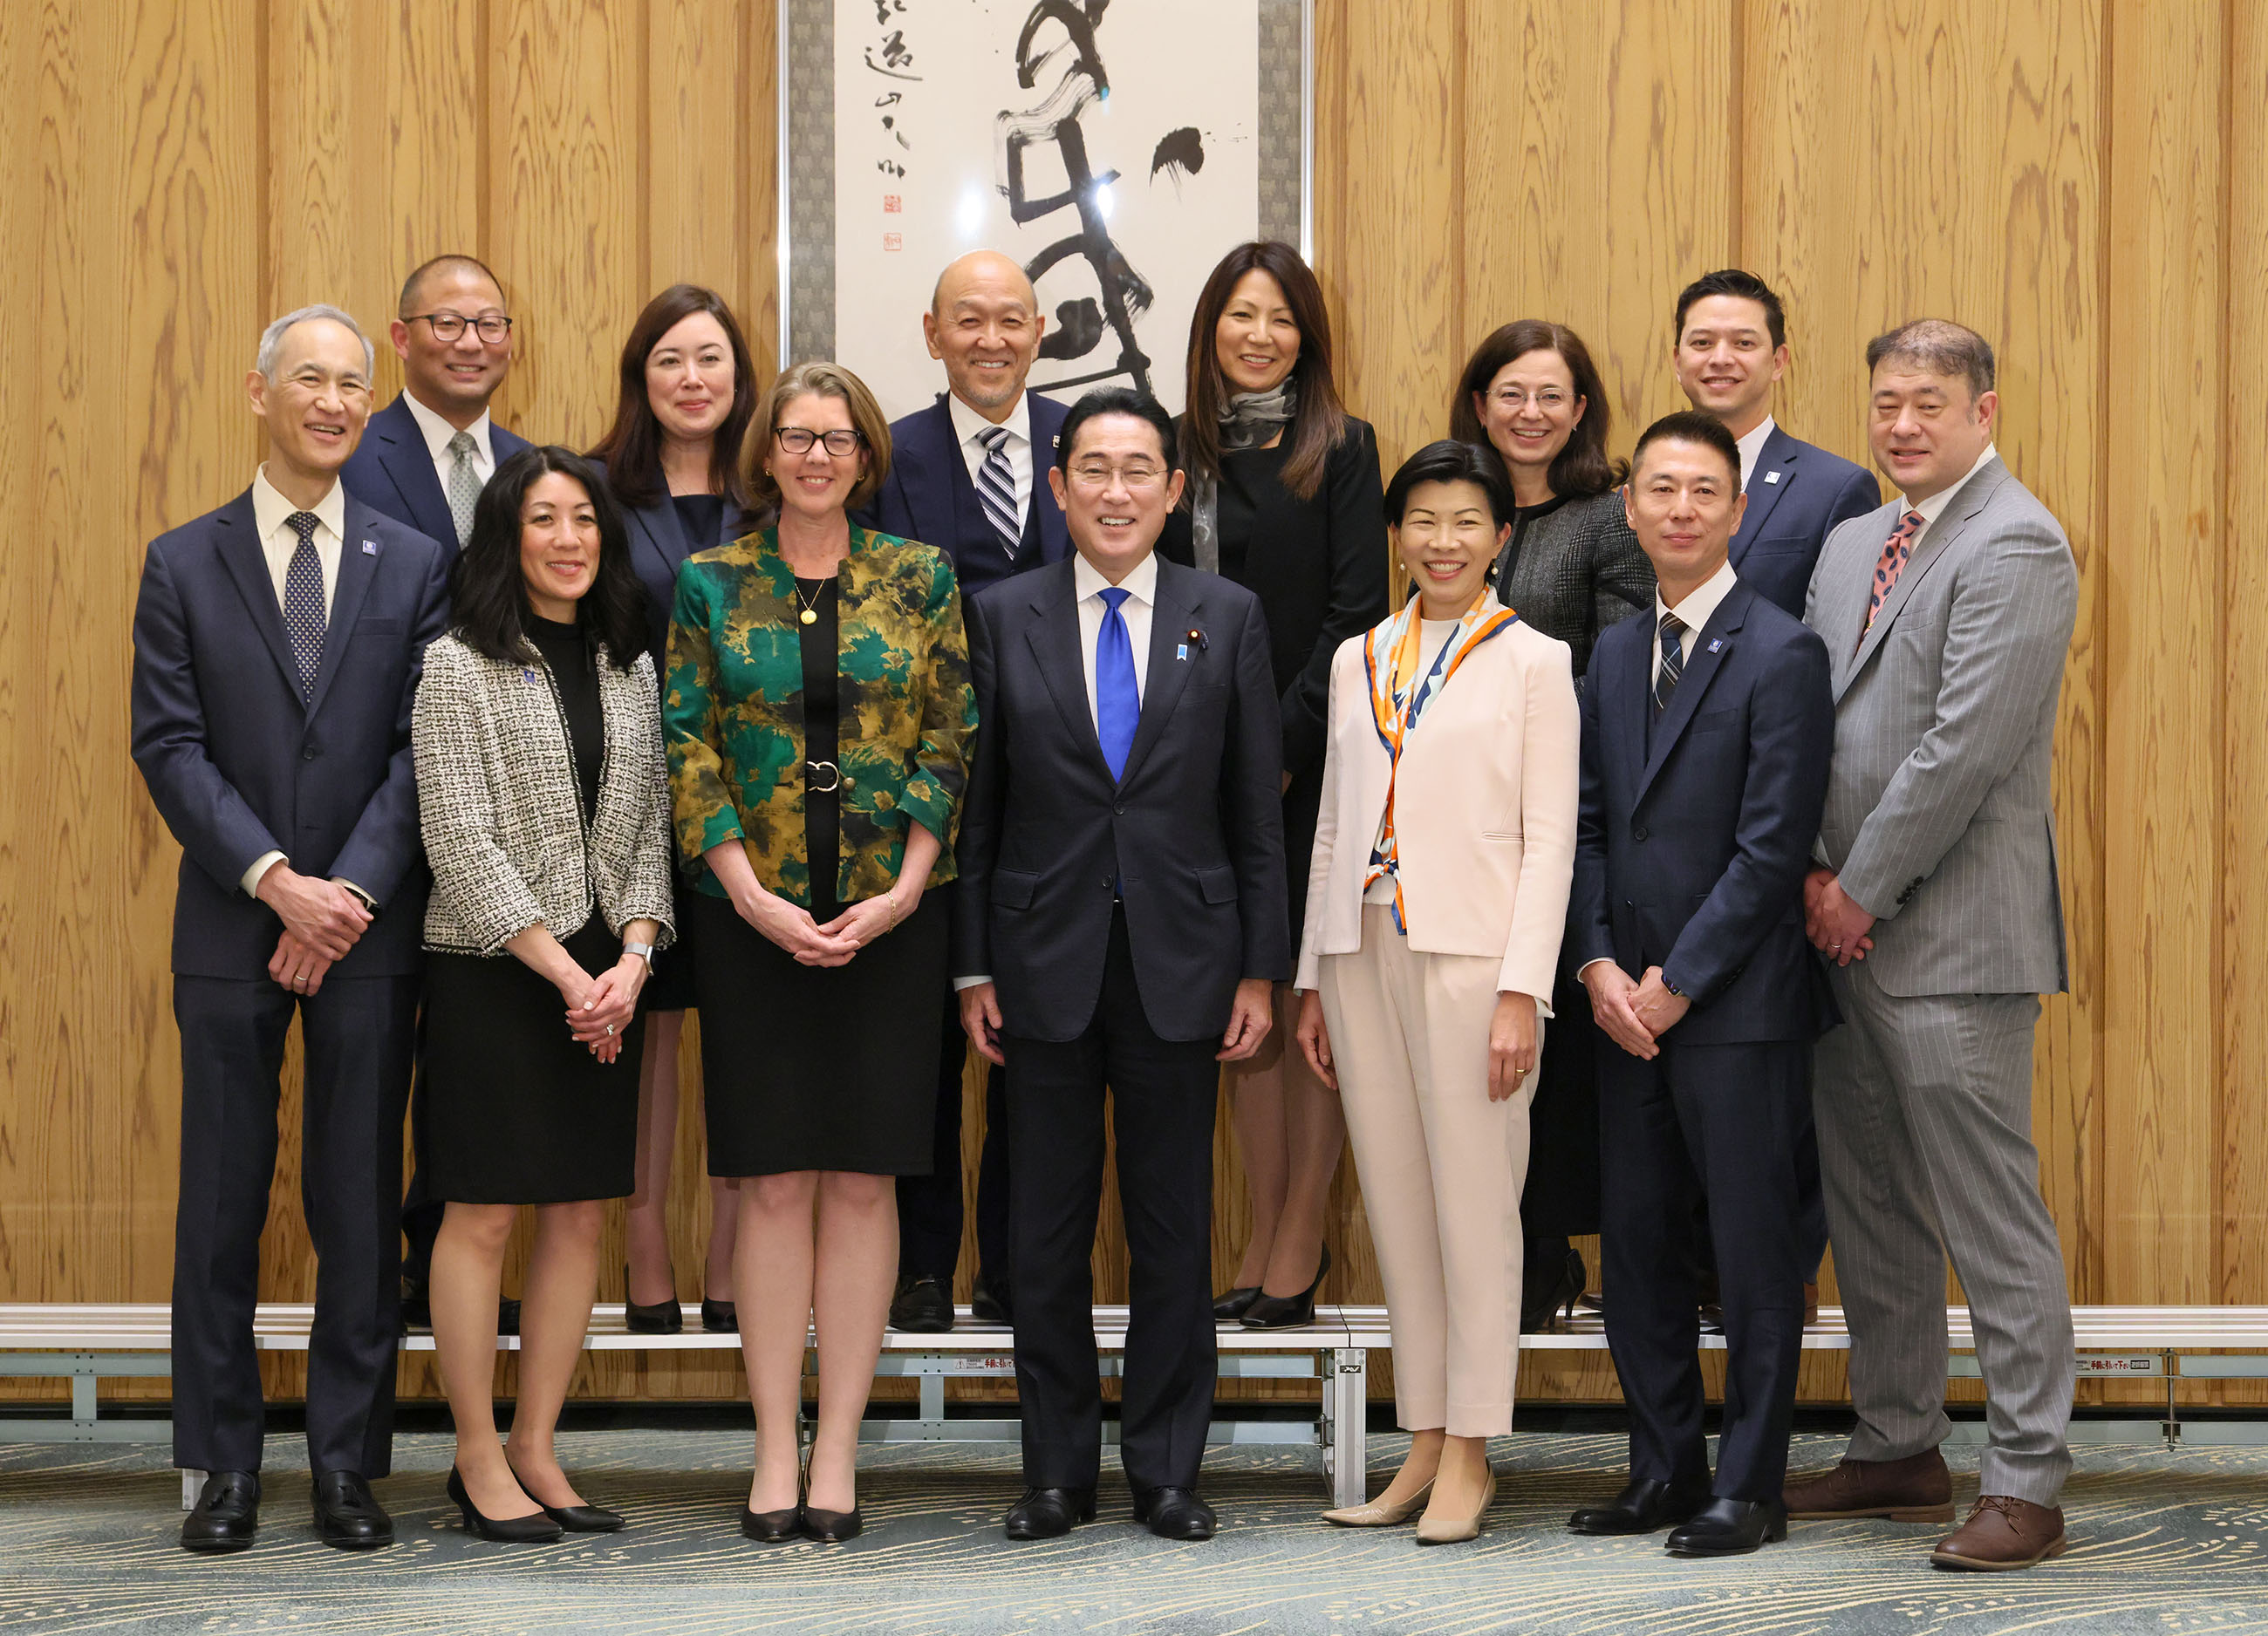 Courtesy Call from the Japanese American Leadership Delegation